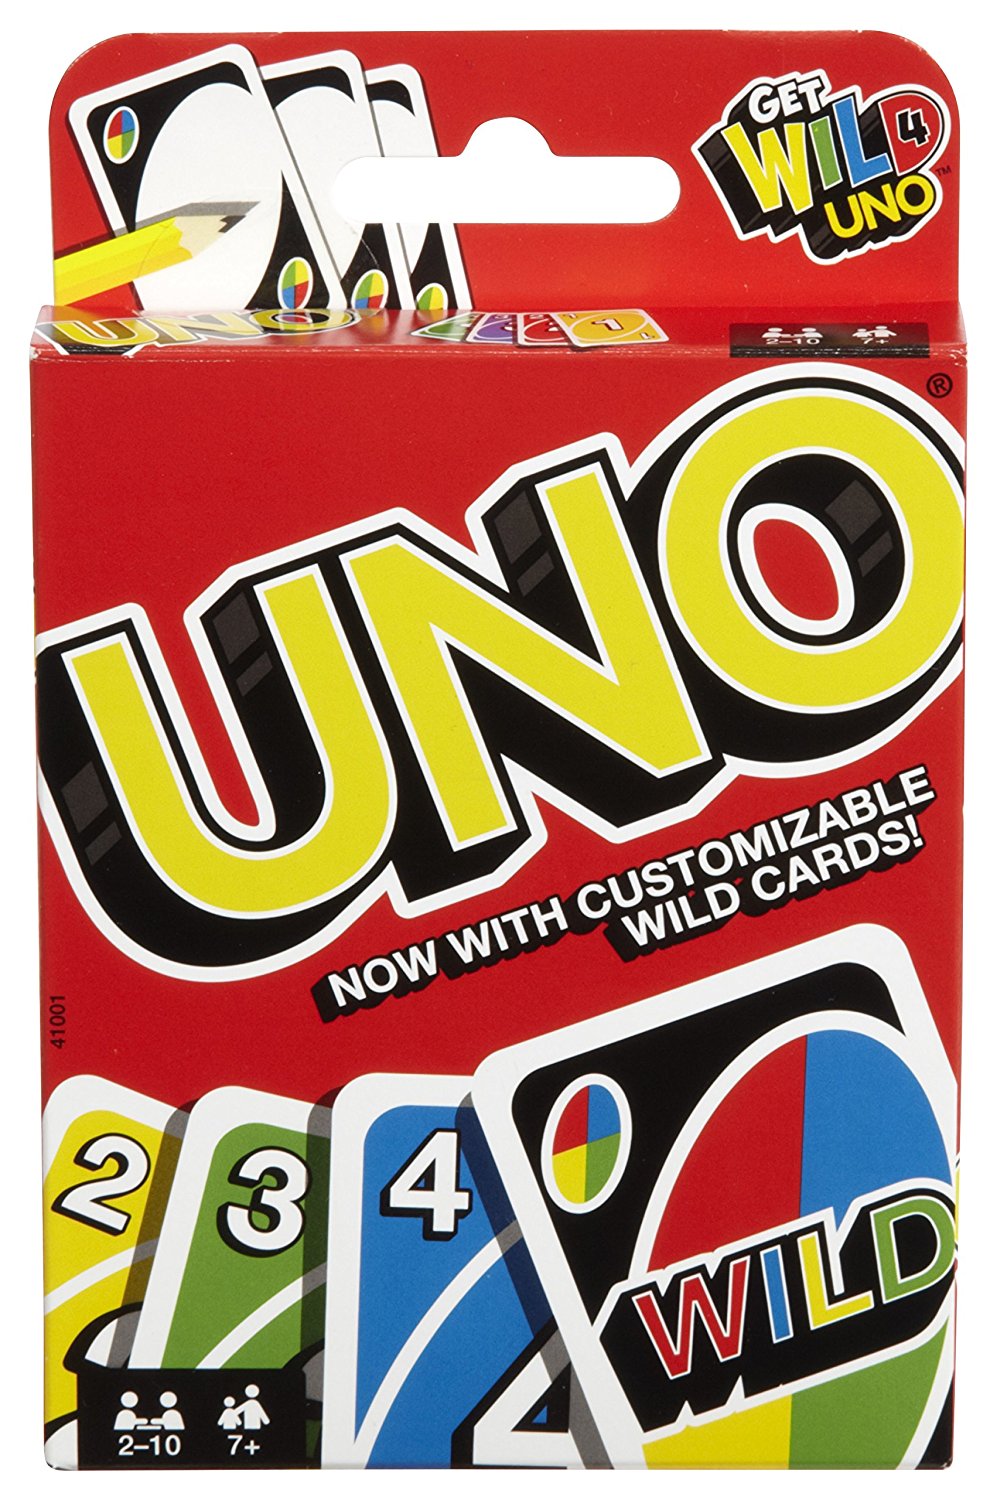 Crazy uno game rules